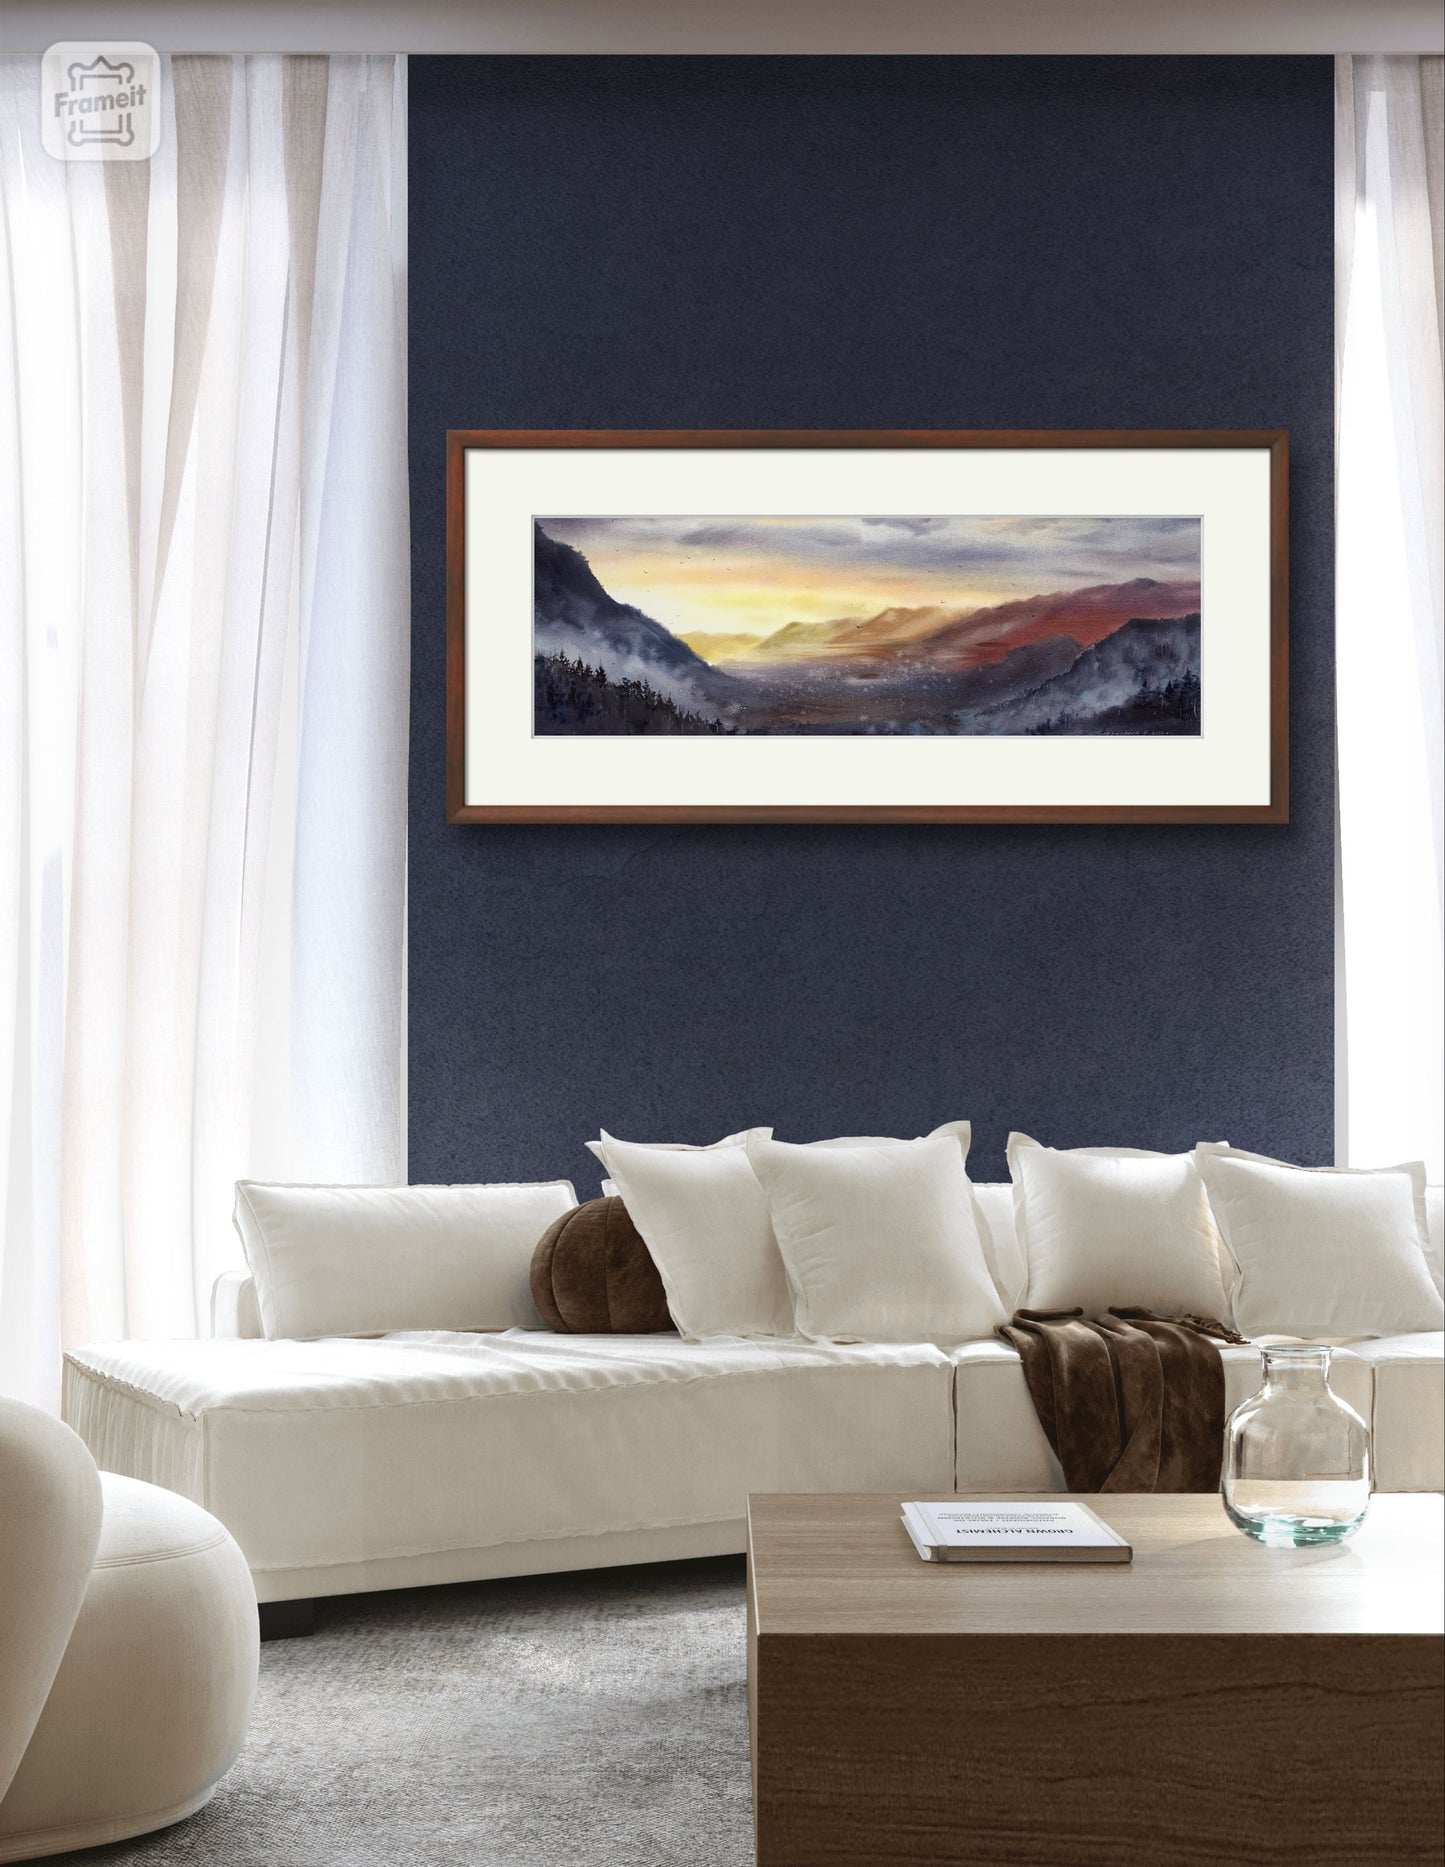 Panorama Mountain Print, Nature Canvas Painting, Panoramic Calm Landscape, Home Decoration, Above Bed Wall Decor, Sunset